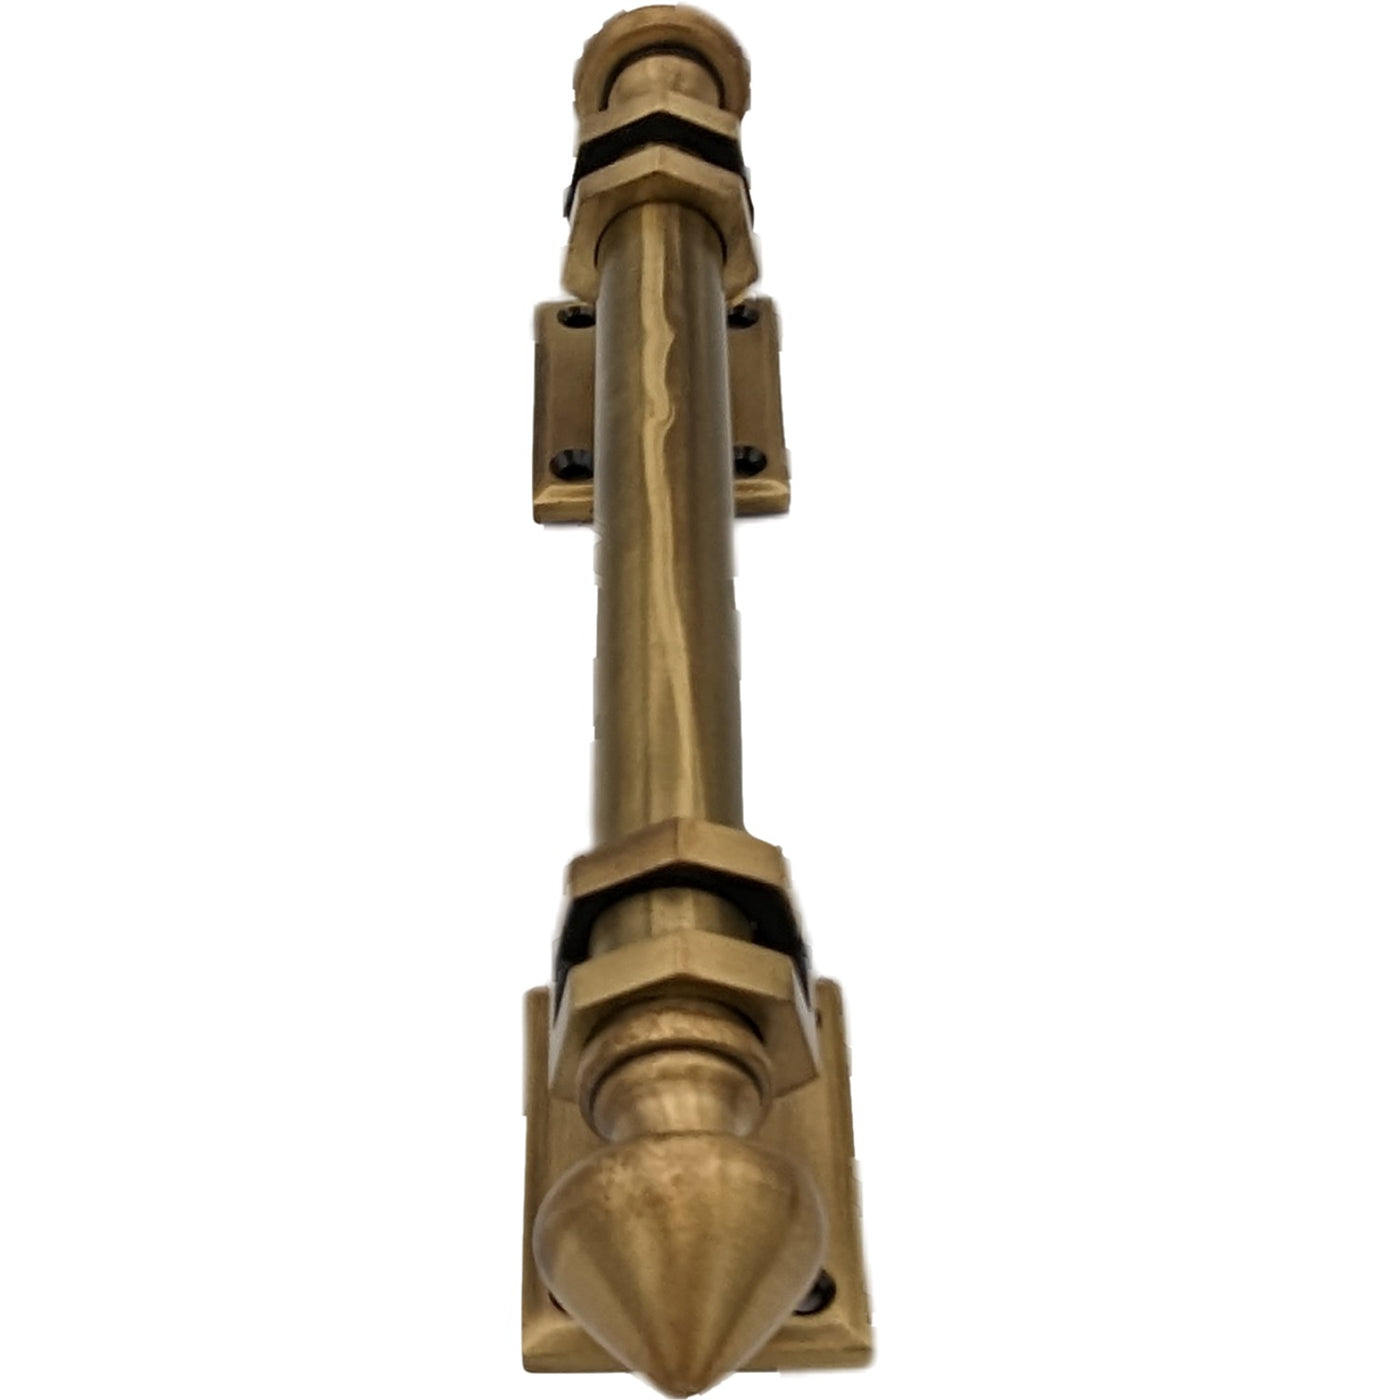 8 Inch Solid Brass Colonial Style Pull